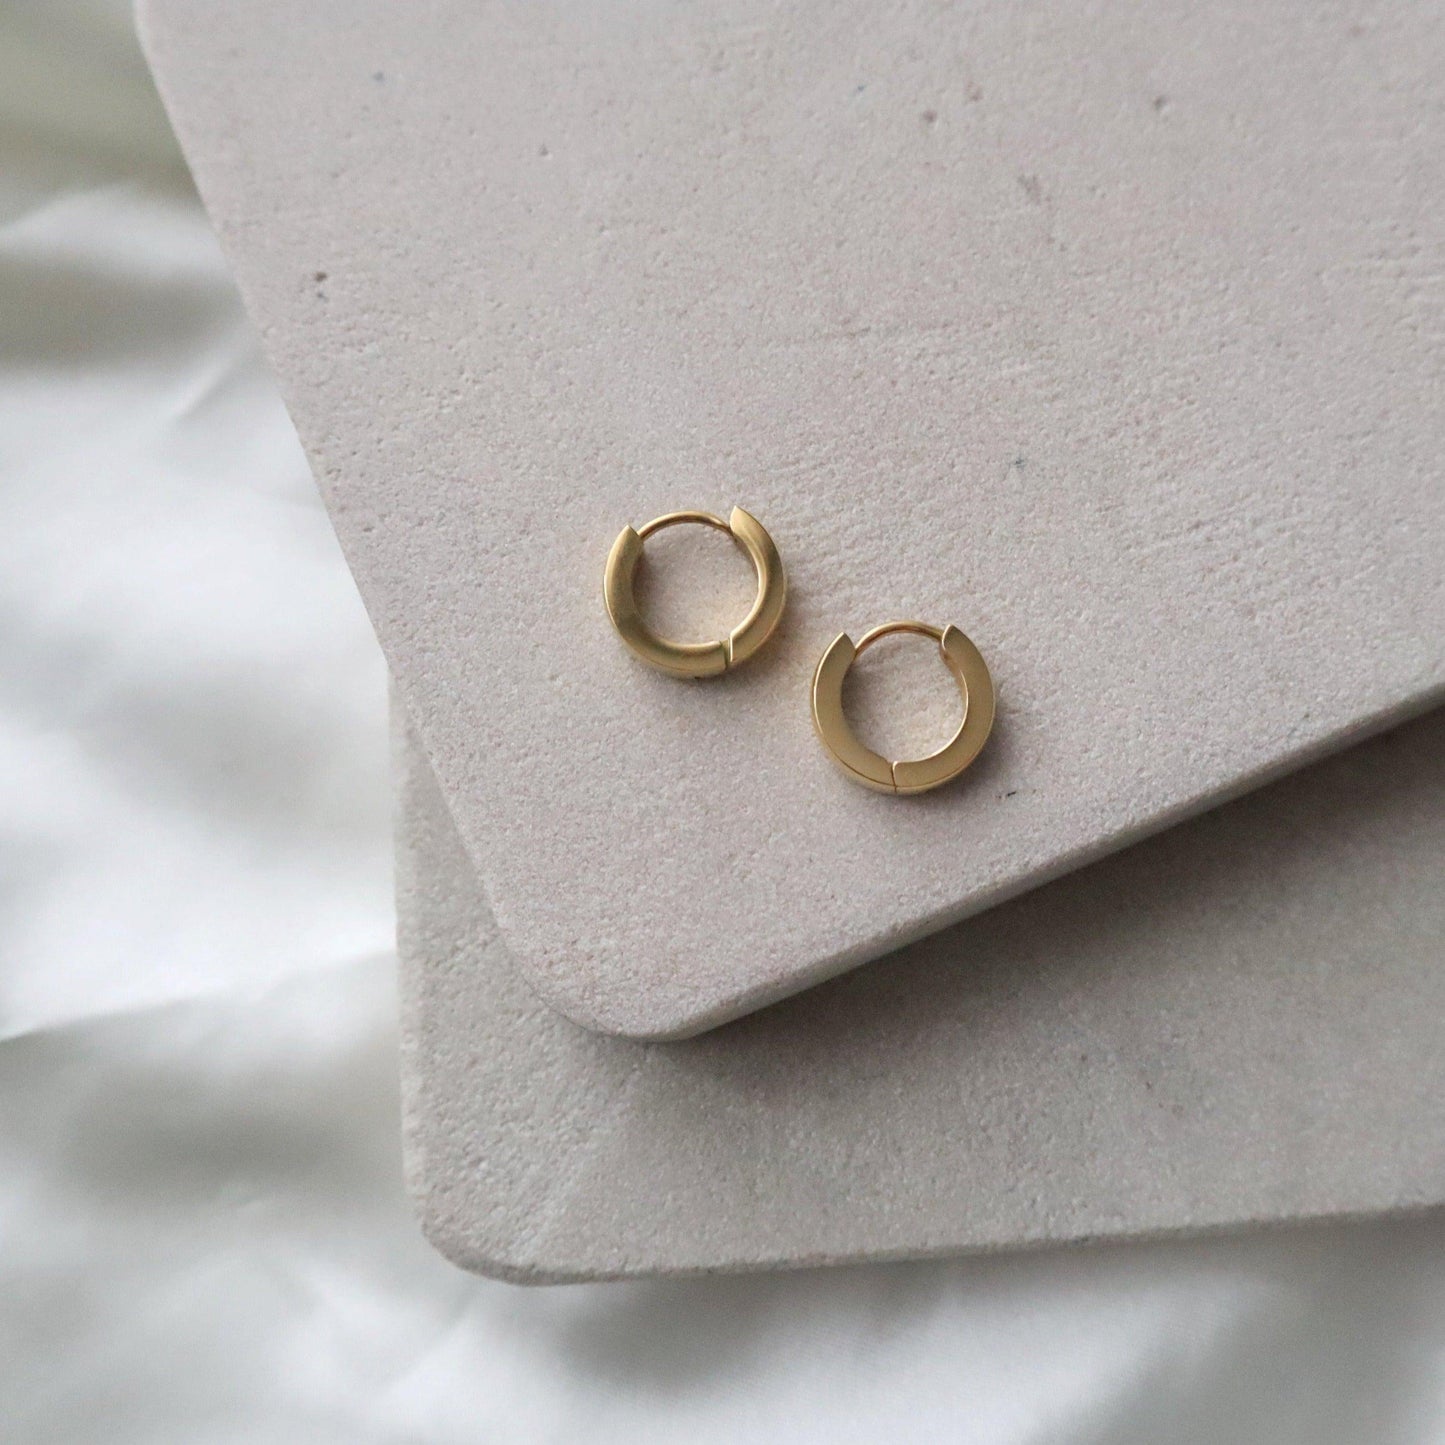 Sadie Hoops | Minimalistic Hoops - JESSA JEWELRY | GOLD JEWELRY; dainty, affordable gold everyday jewelry. Tarnish free, water-resistant, hypoallergenic. Jewelry for everyday wear